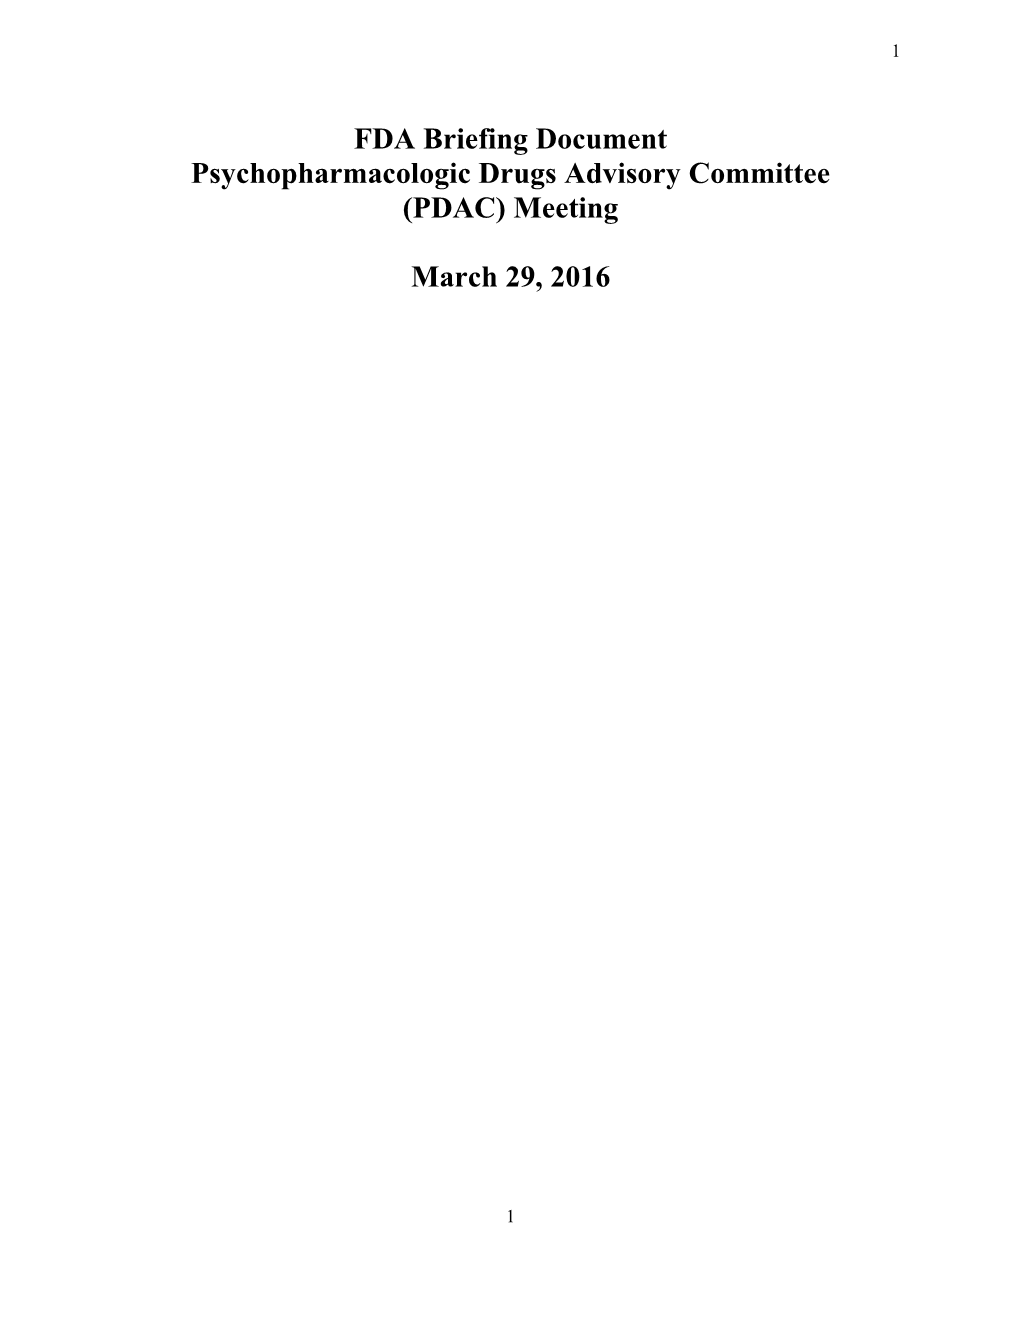 Briefing Document Psychopharmacologic Drugs Advisory Committee (PDAC) Meeting